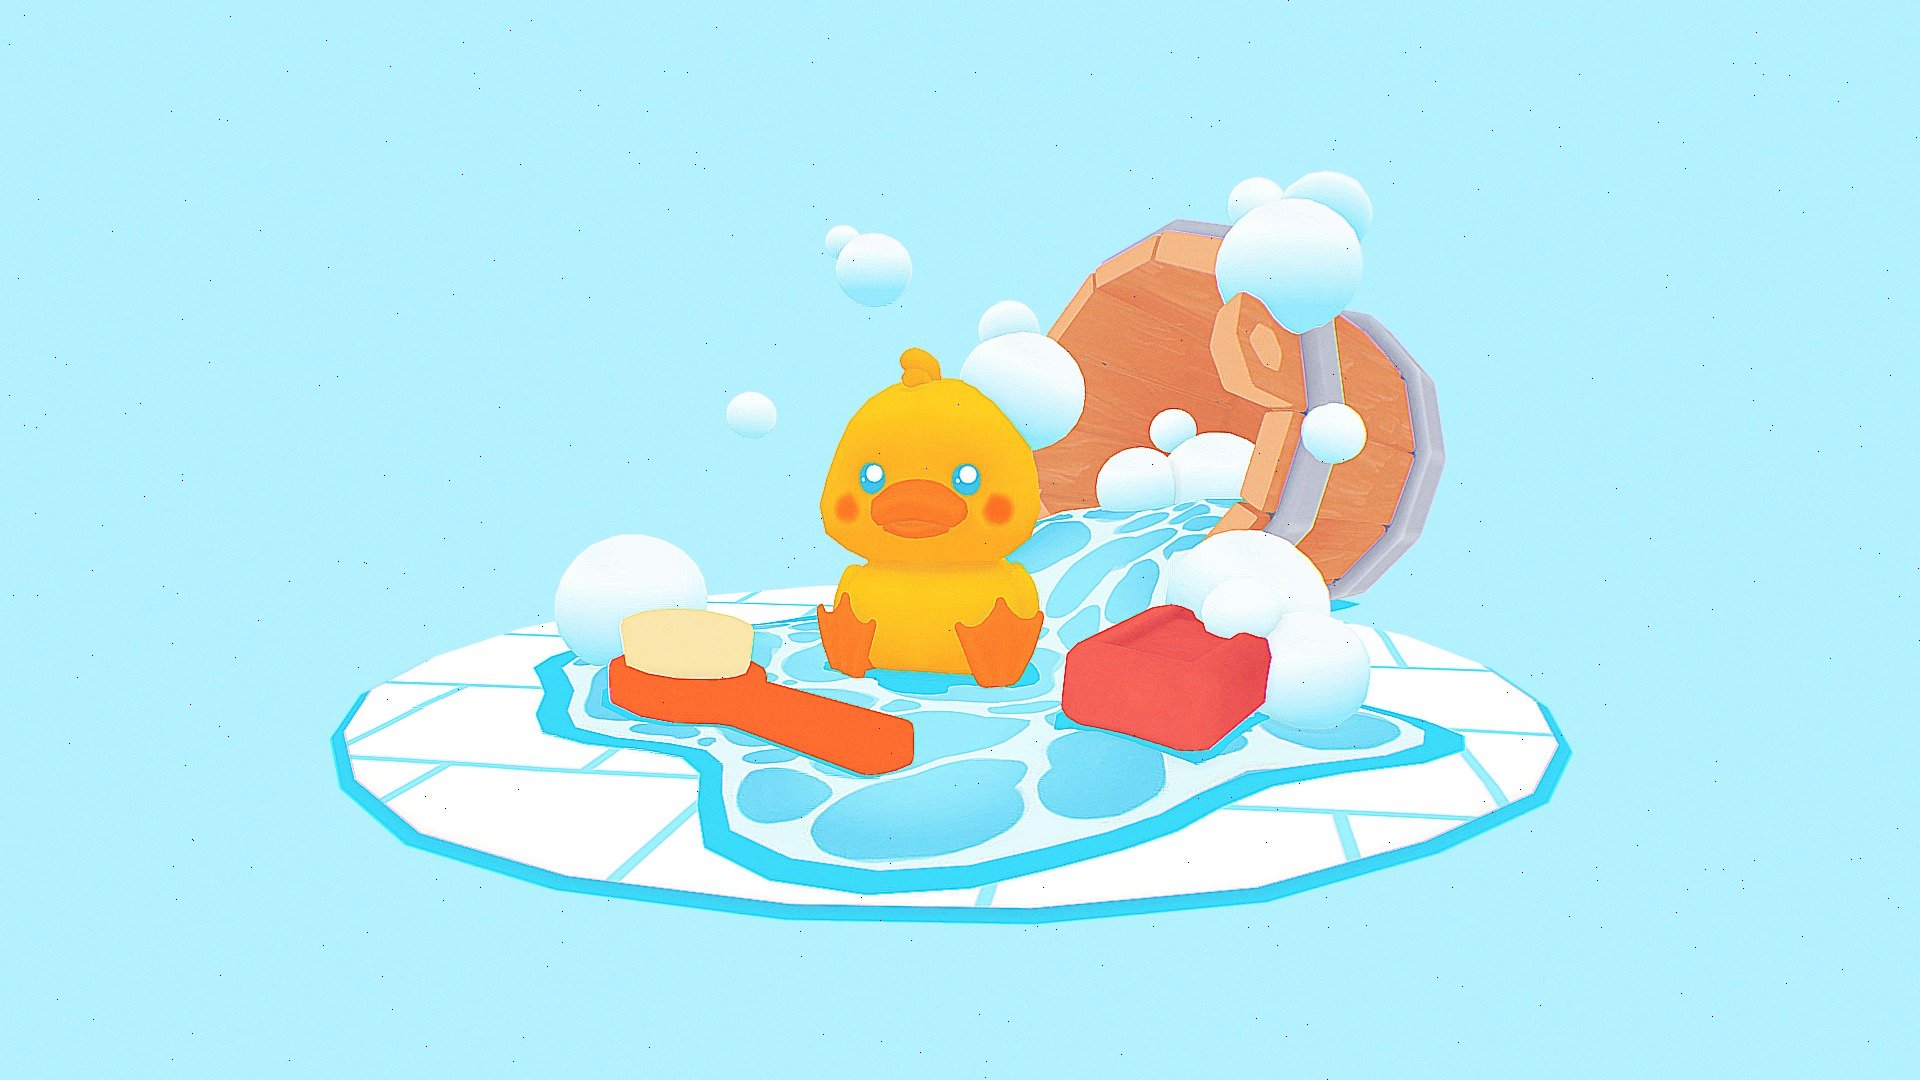 A cute rubber duckie that fell out of their bath. Made for the first week of the sketchfab weekly chellenges. 

I saw the prompt and felt super inspired. I had to create something cute 3d model